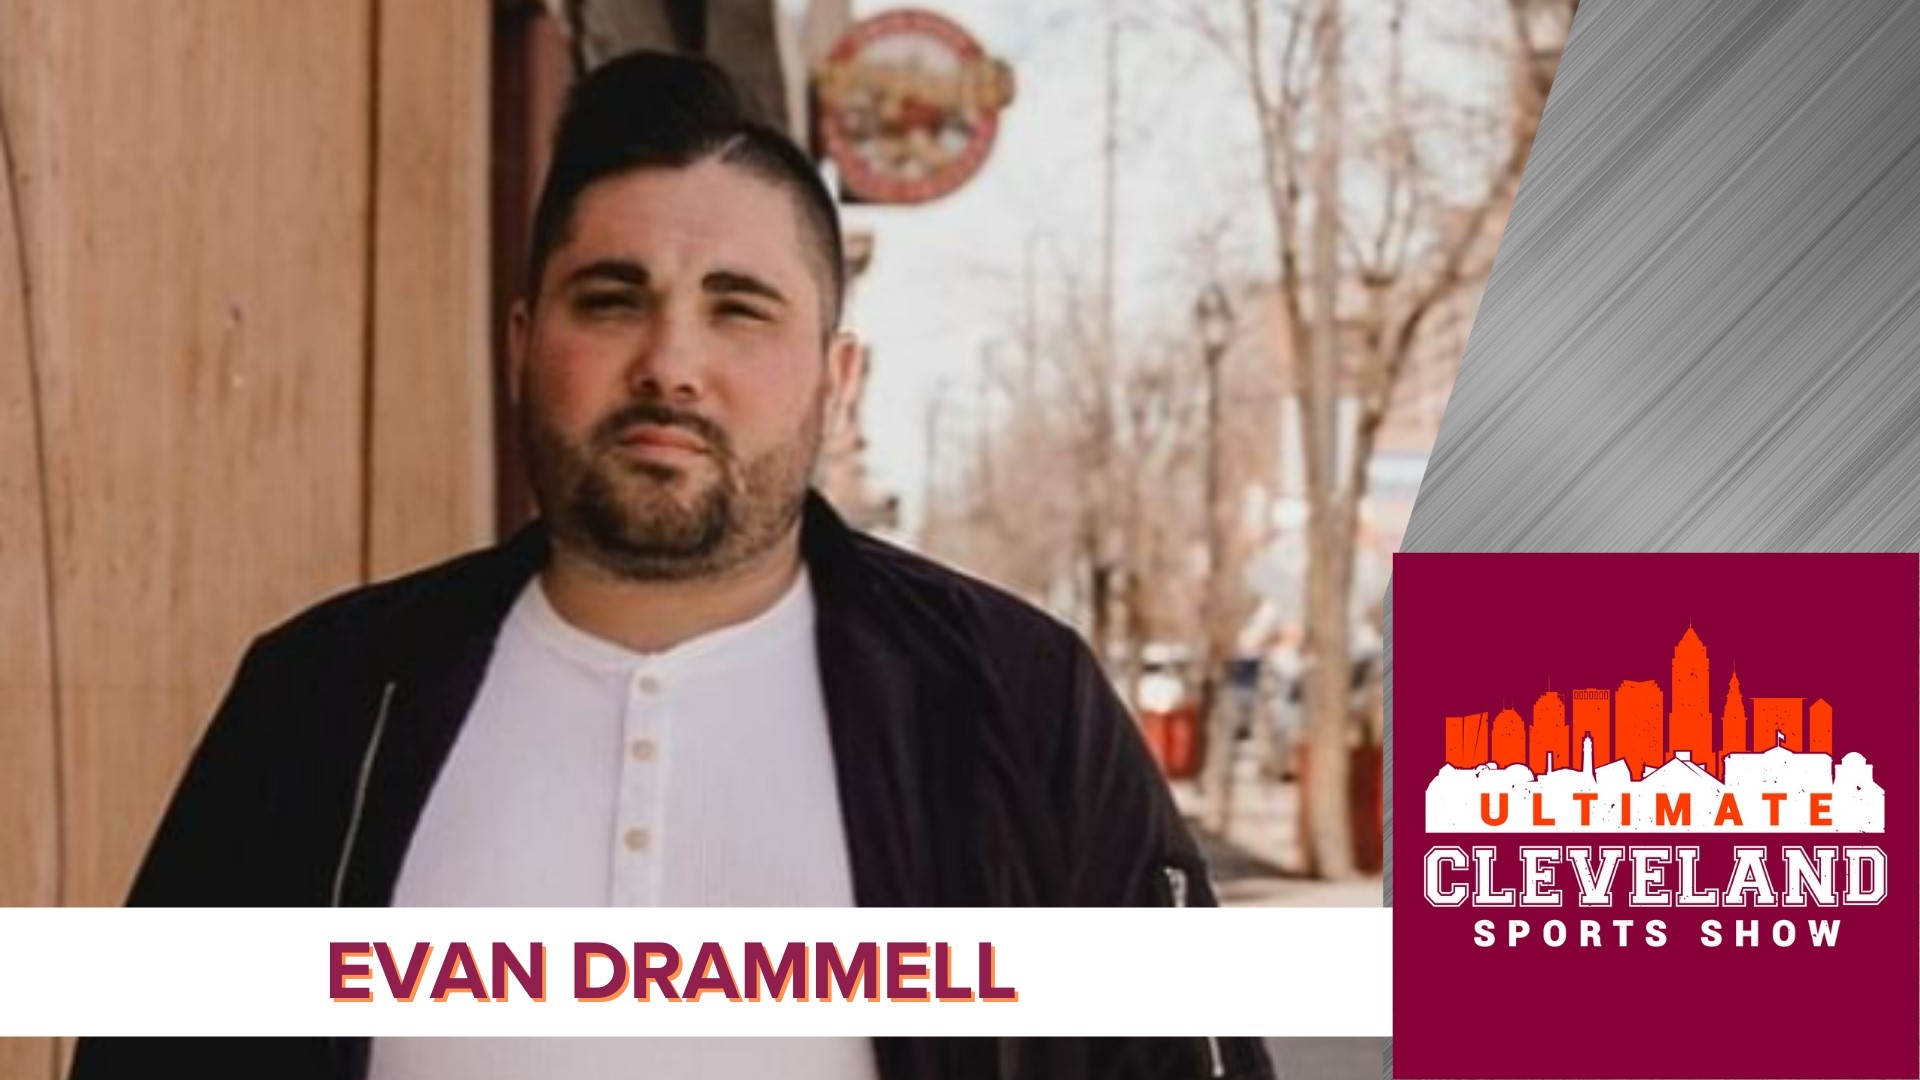 Evan Dammarell attended the 2022 NBA Draft Lottery in Chicago and shares who he thinks is a realistic 14th pick for the Cleveland Cavaliers.